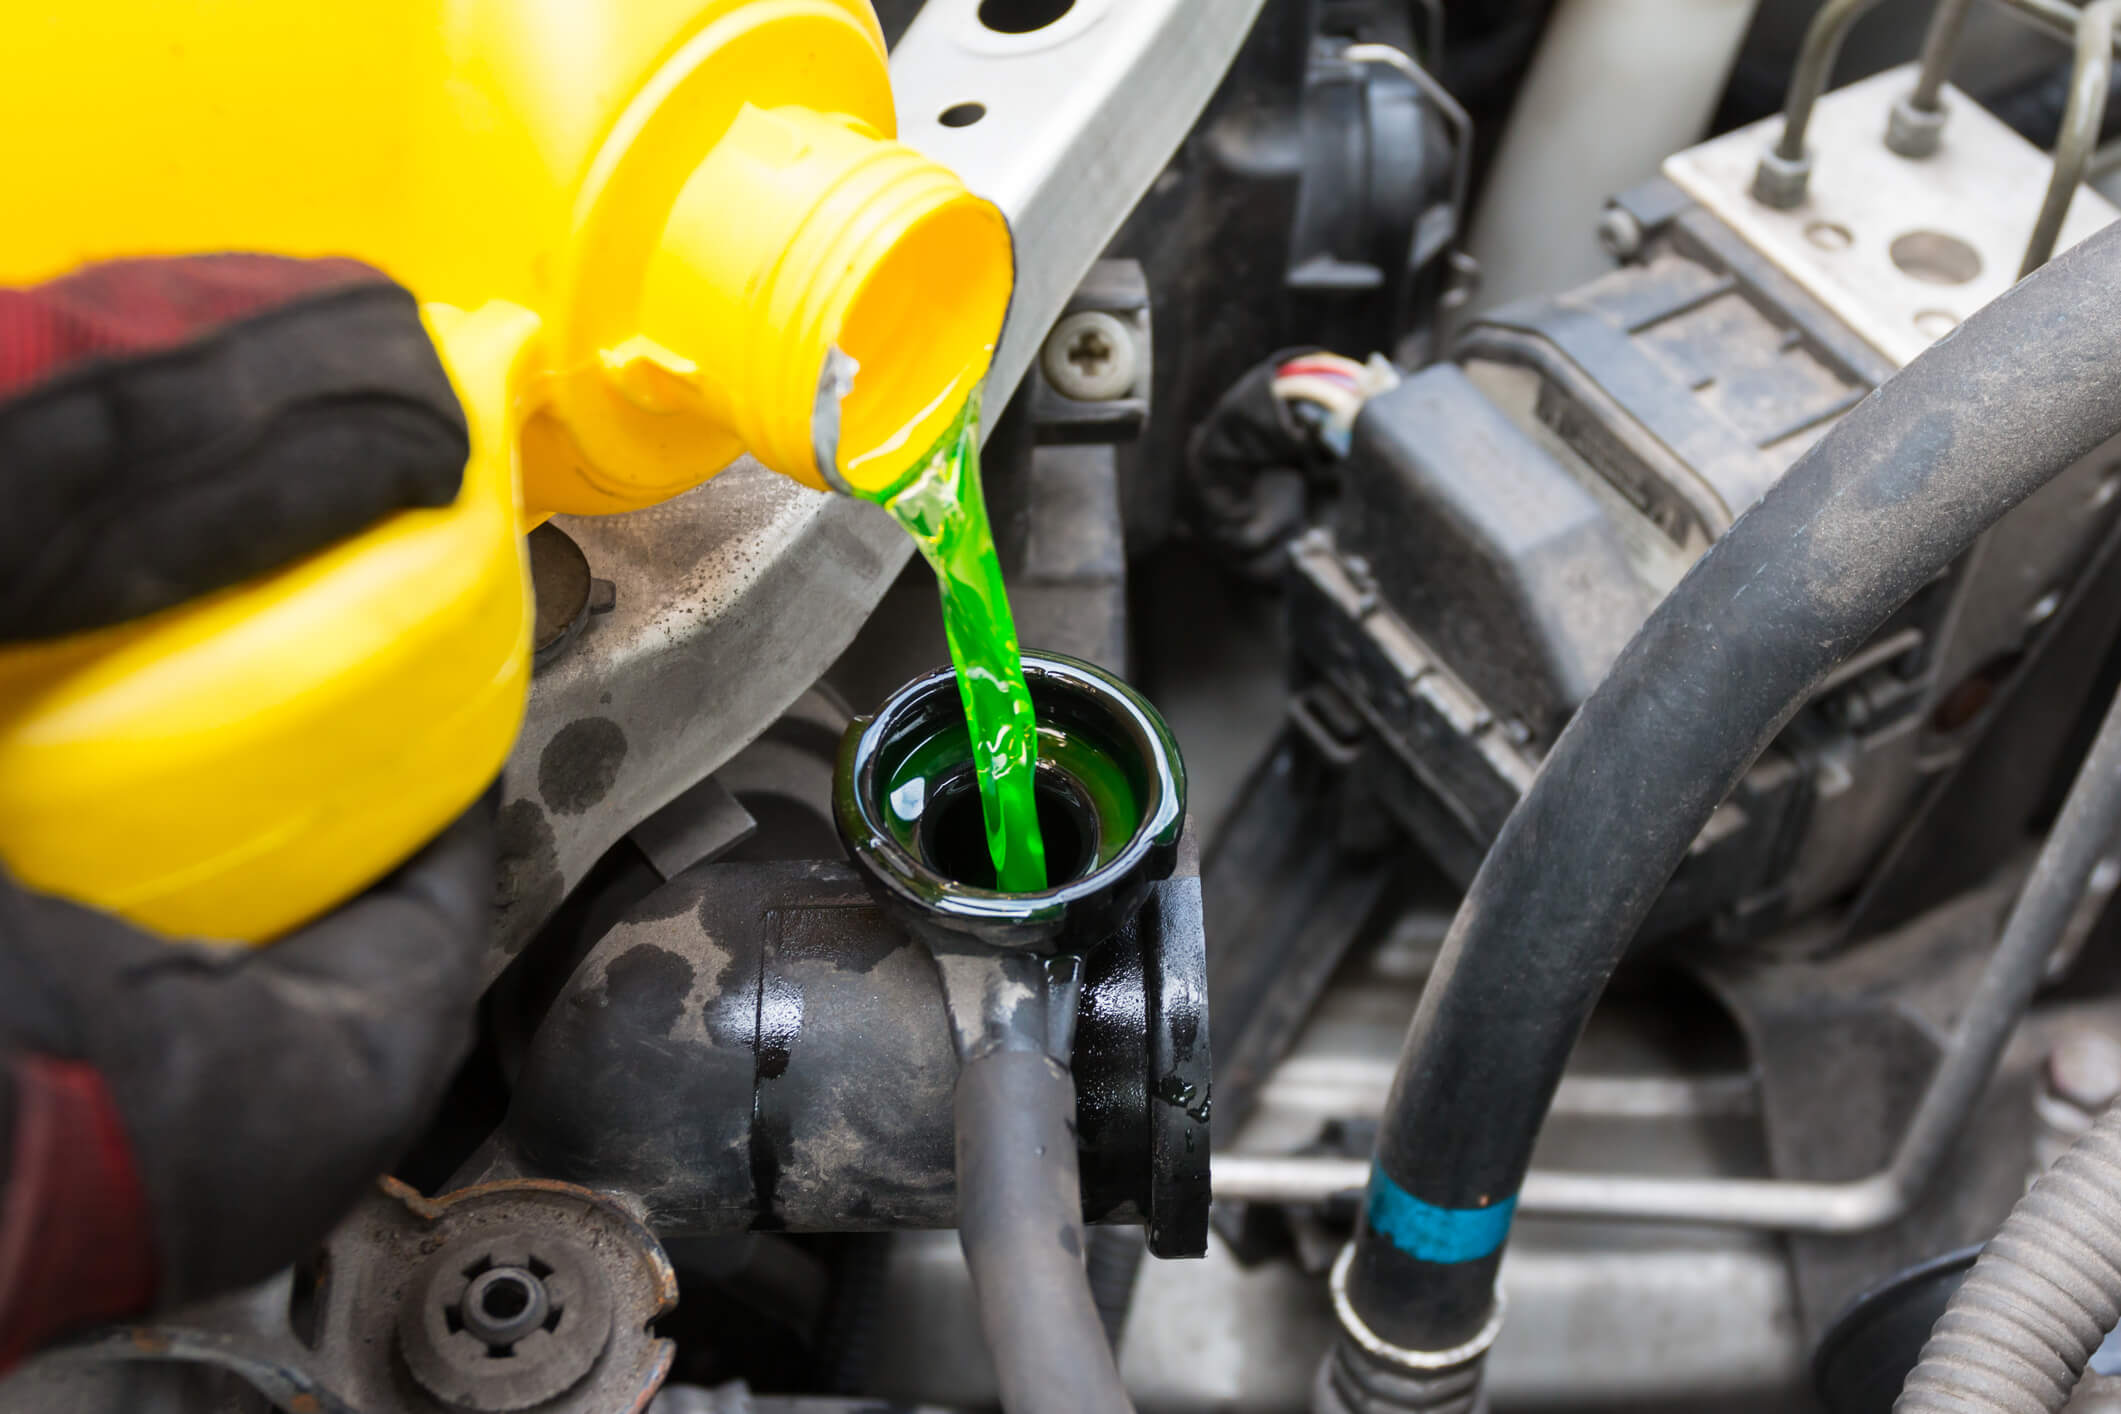 Checking oils and fluids is important in maintaining a safe and reliable vehicle.